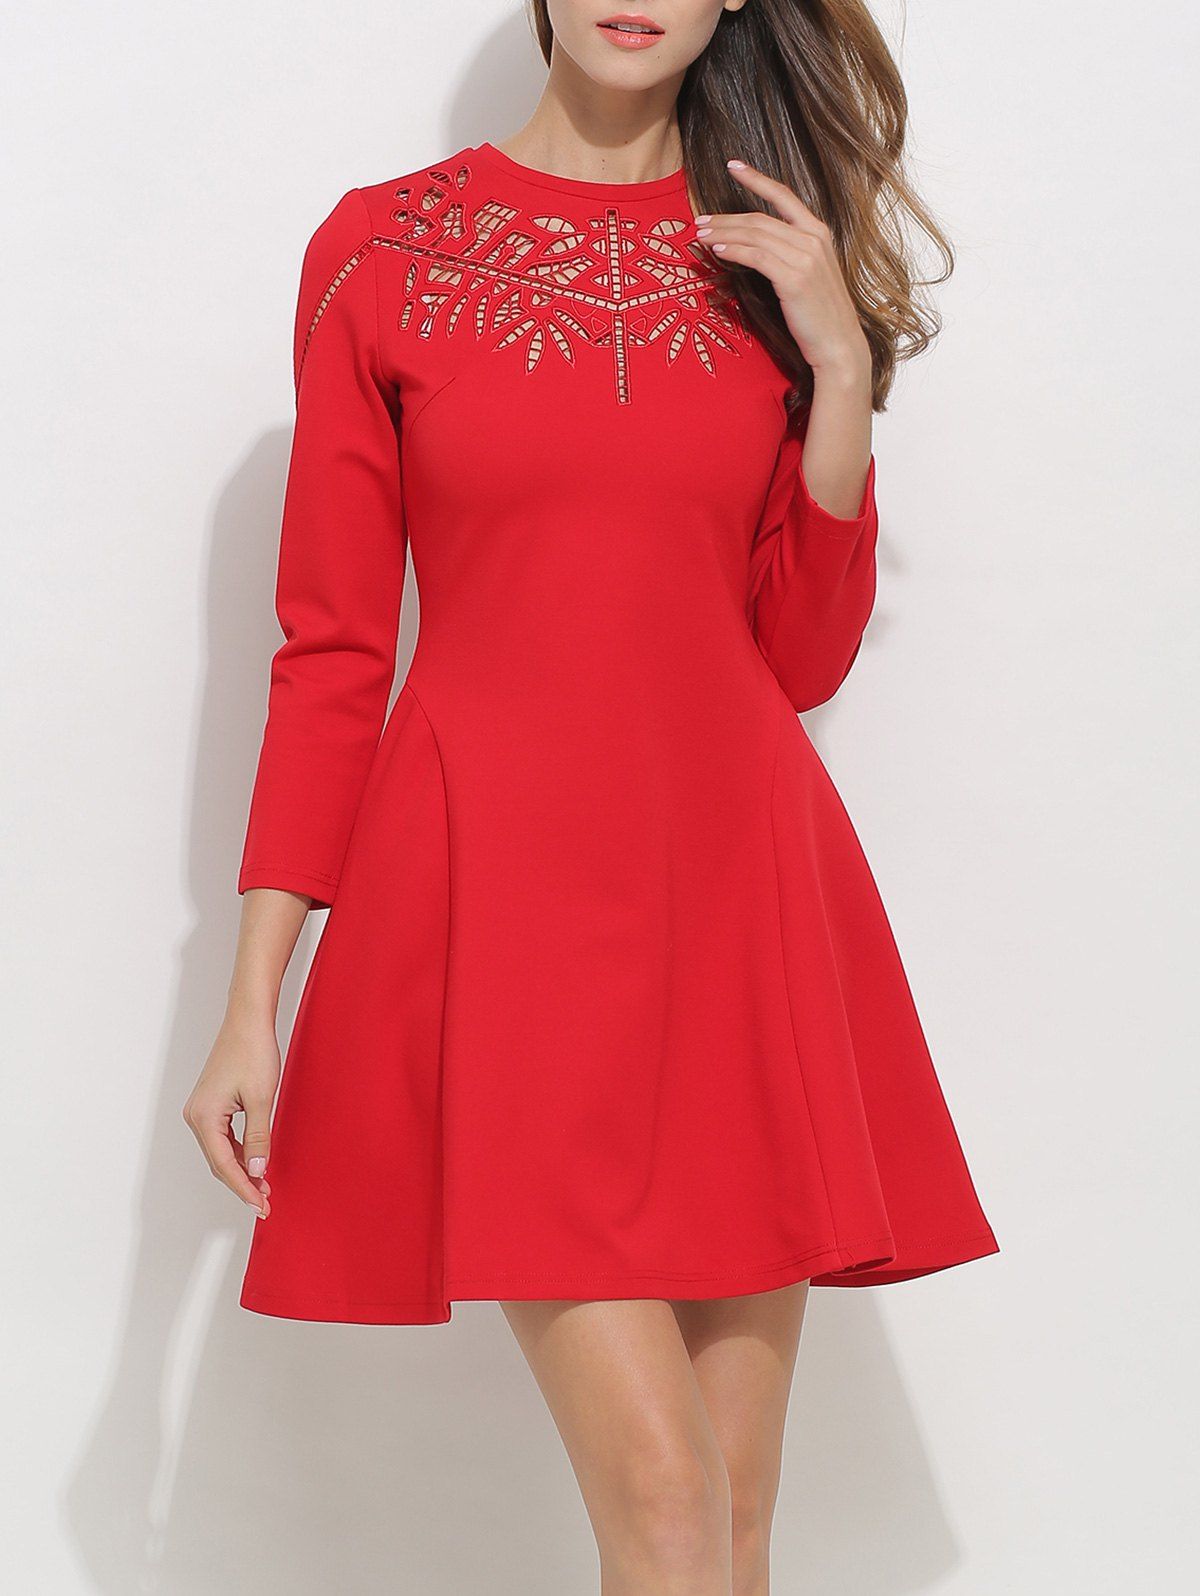 Openwork Long Sleeve Fit and Flare Skater Dress - RED M